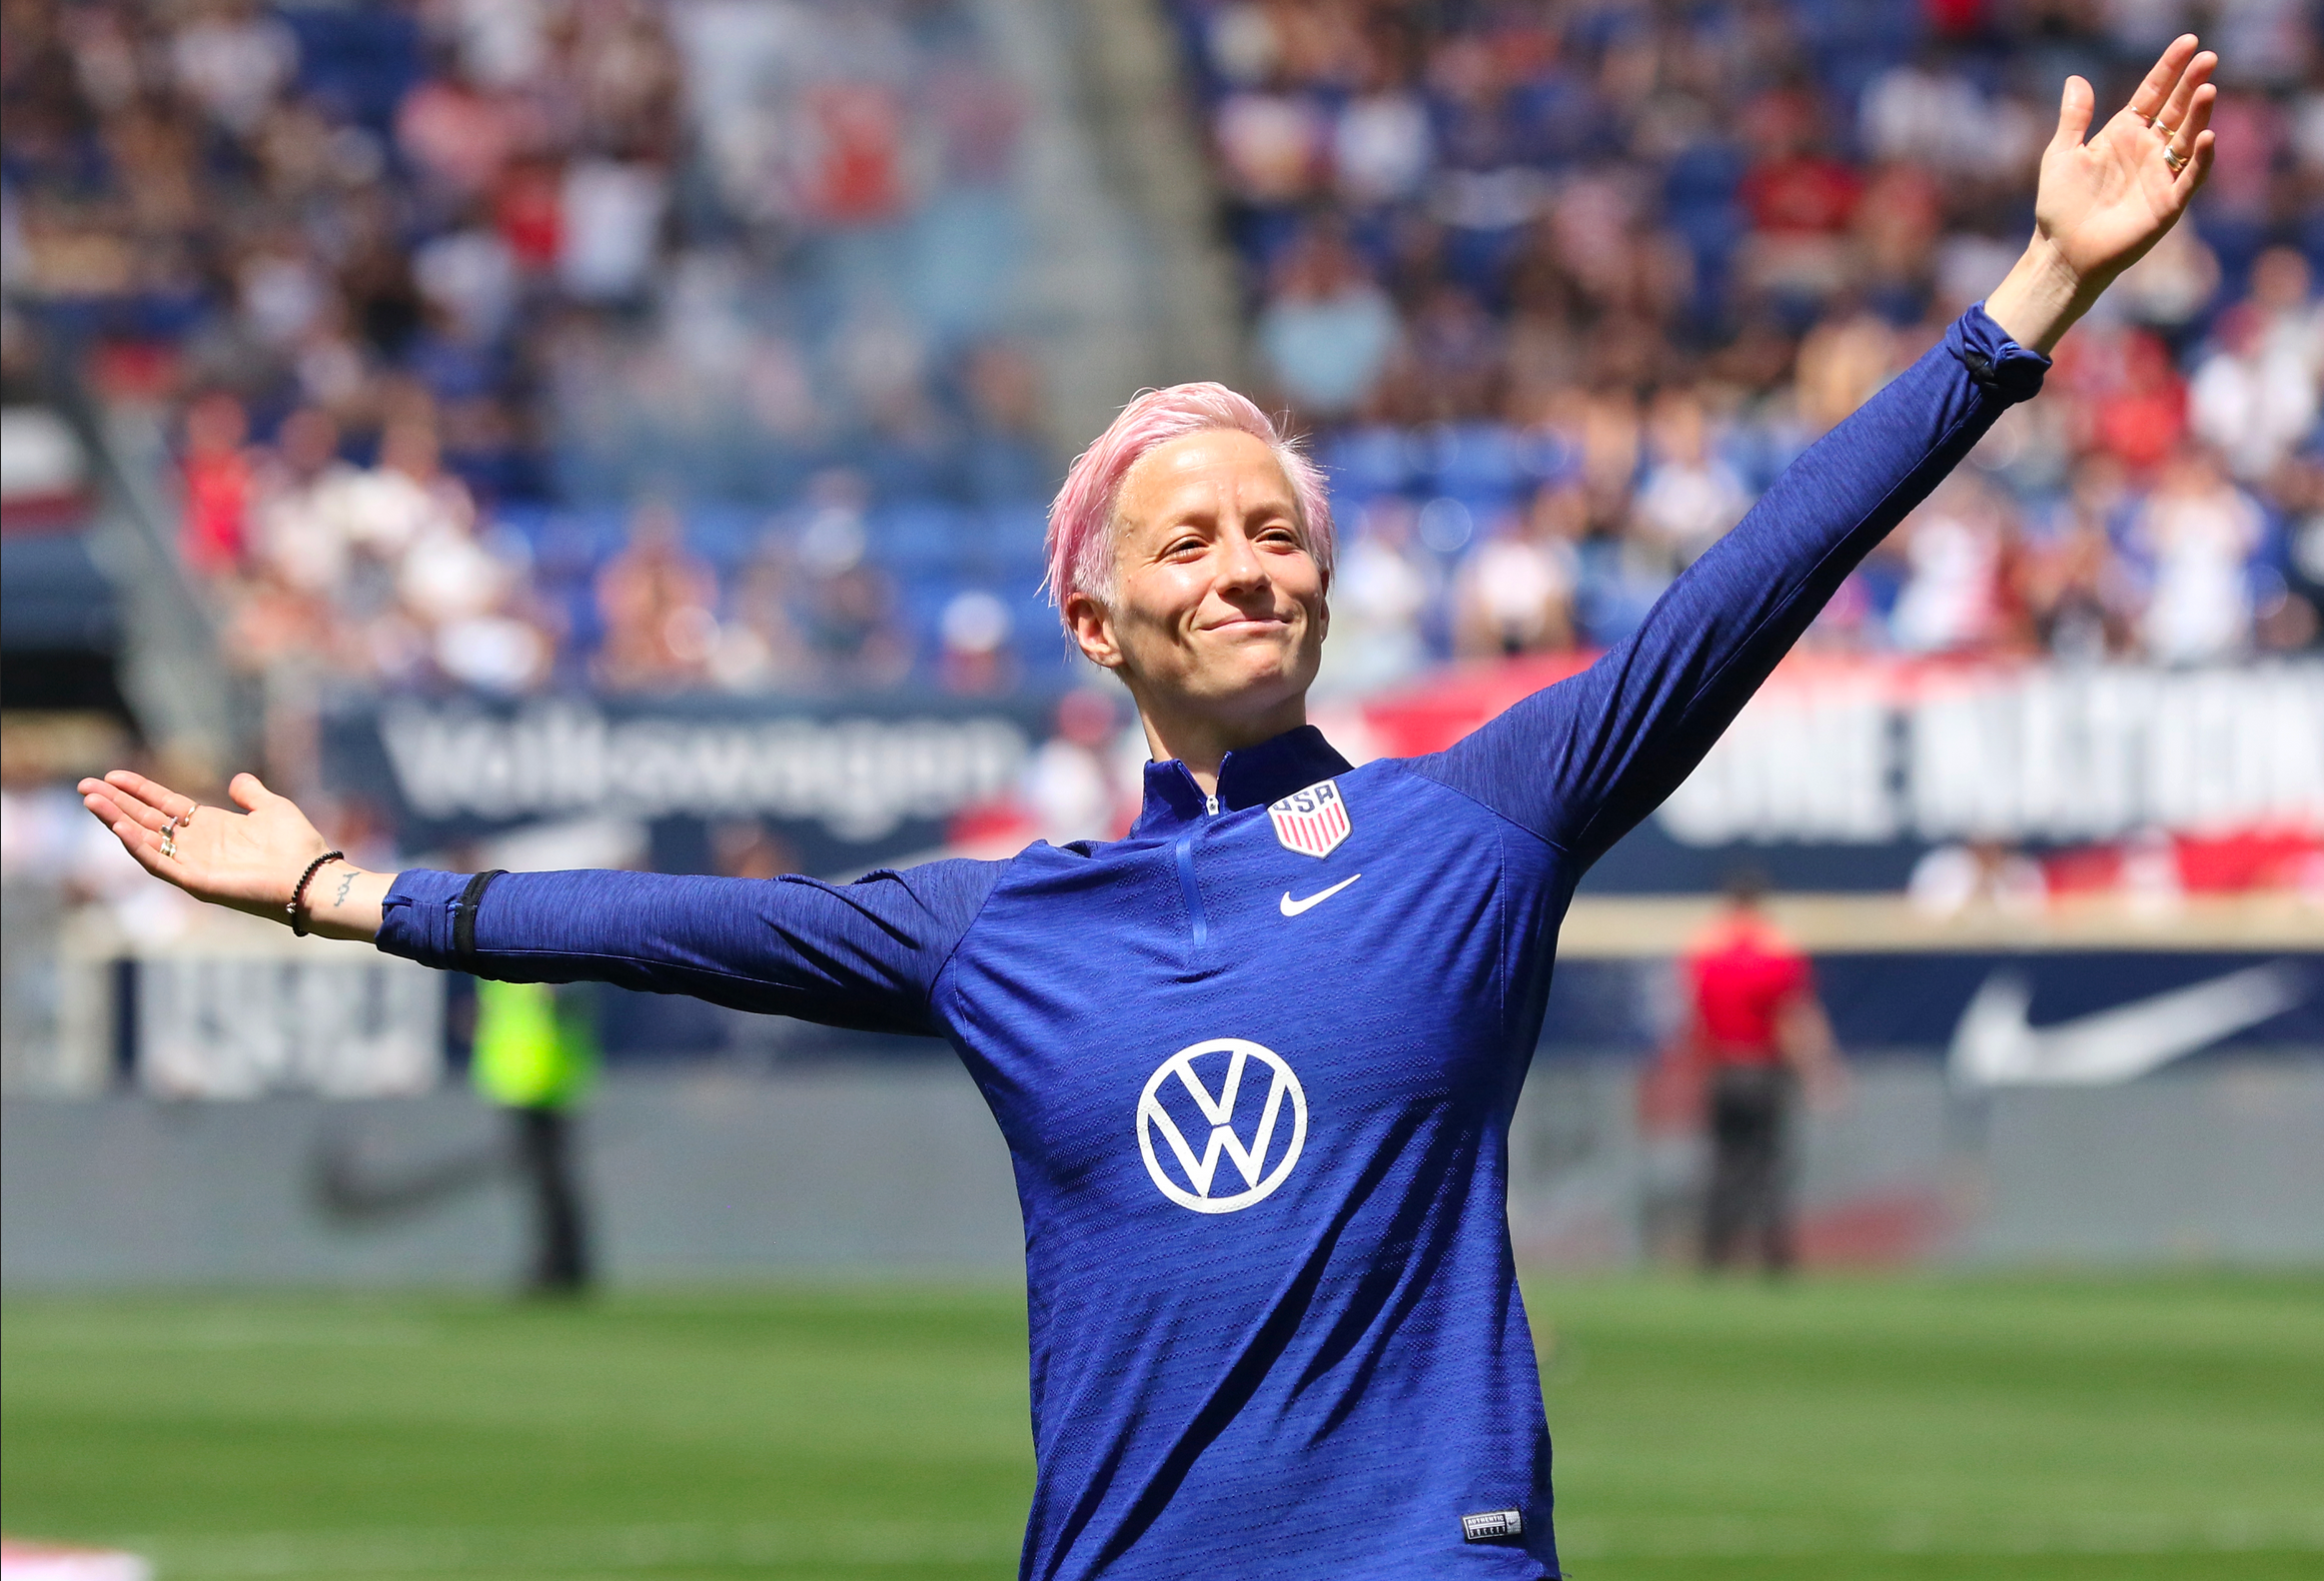 US Soccer Superstar Megan Rapinoe Talks Cannabis, Feminism: 'Everyone Needs To Have A Seat At The Table'